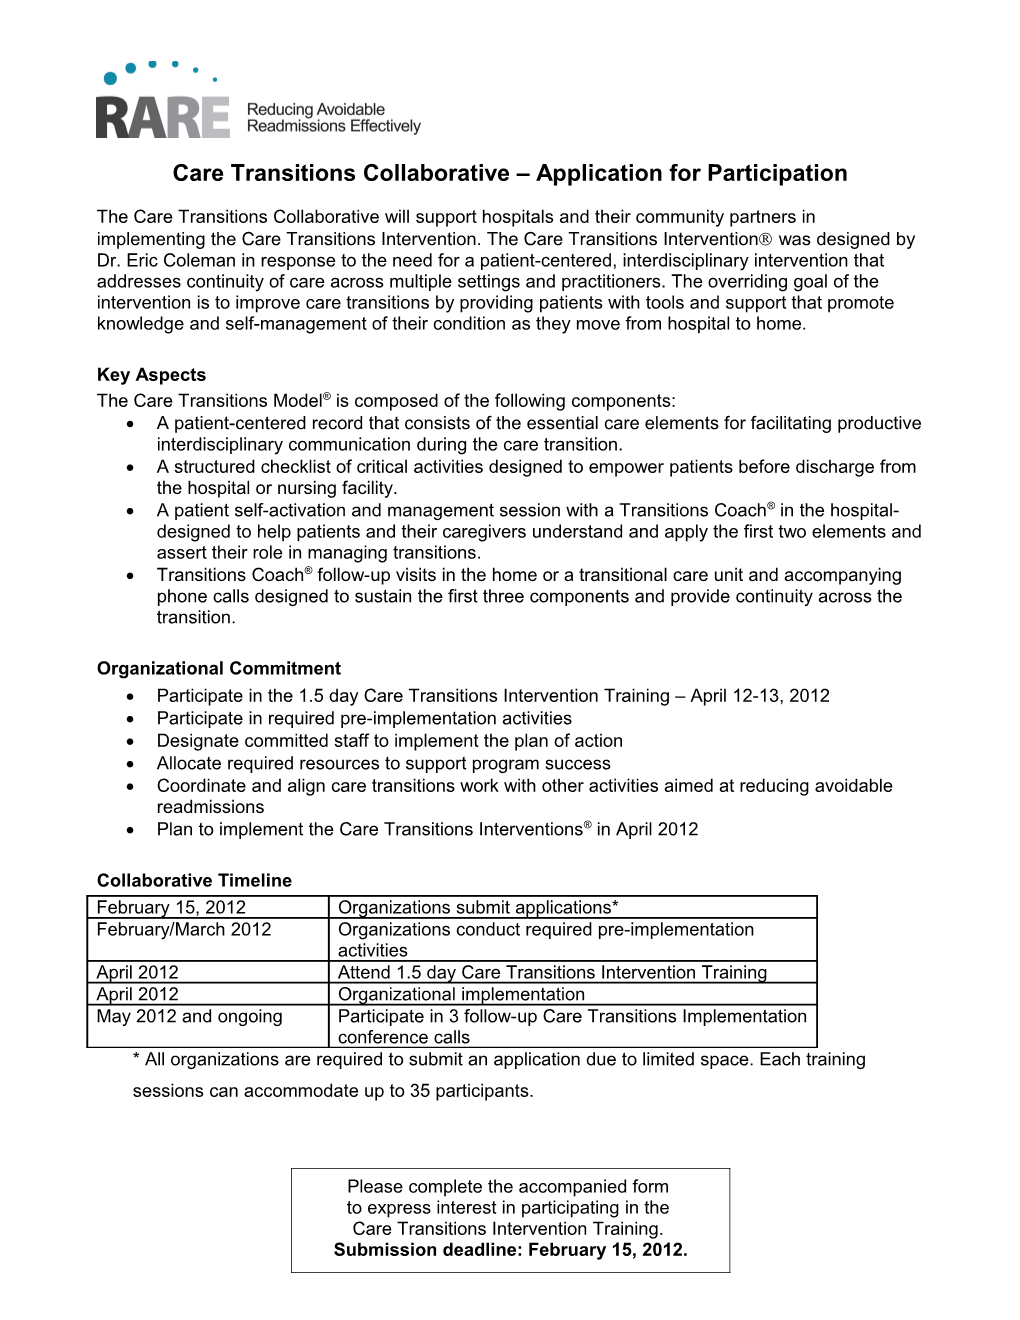 Care Transitions Collaborative Call for Participation